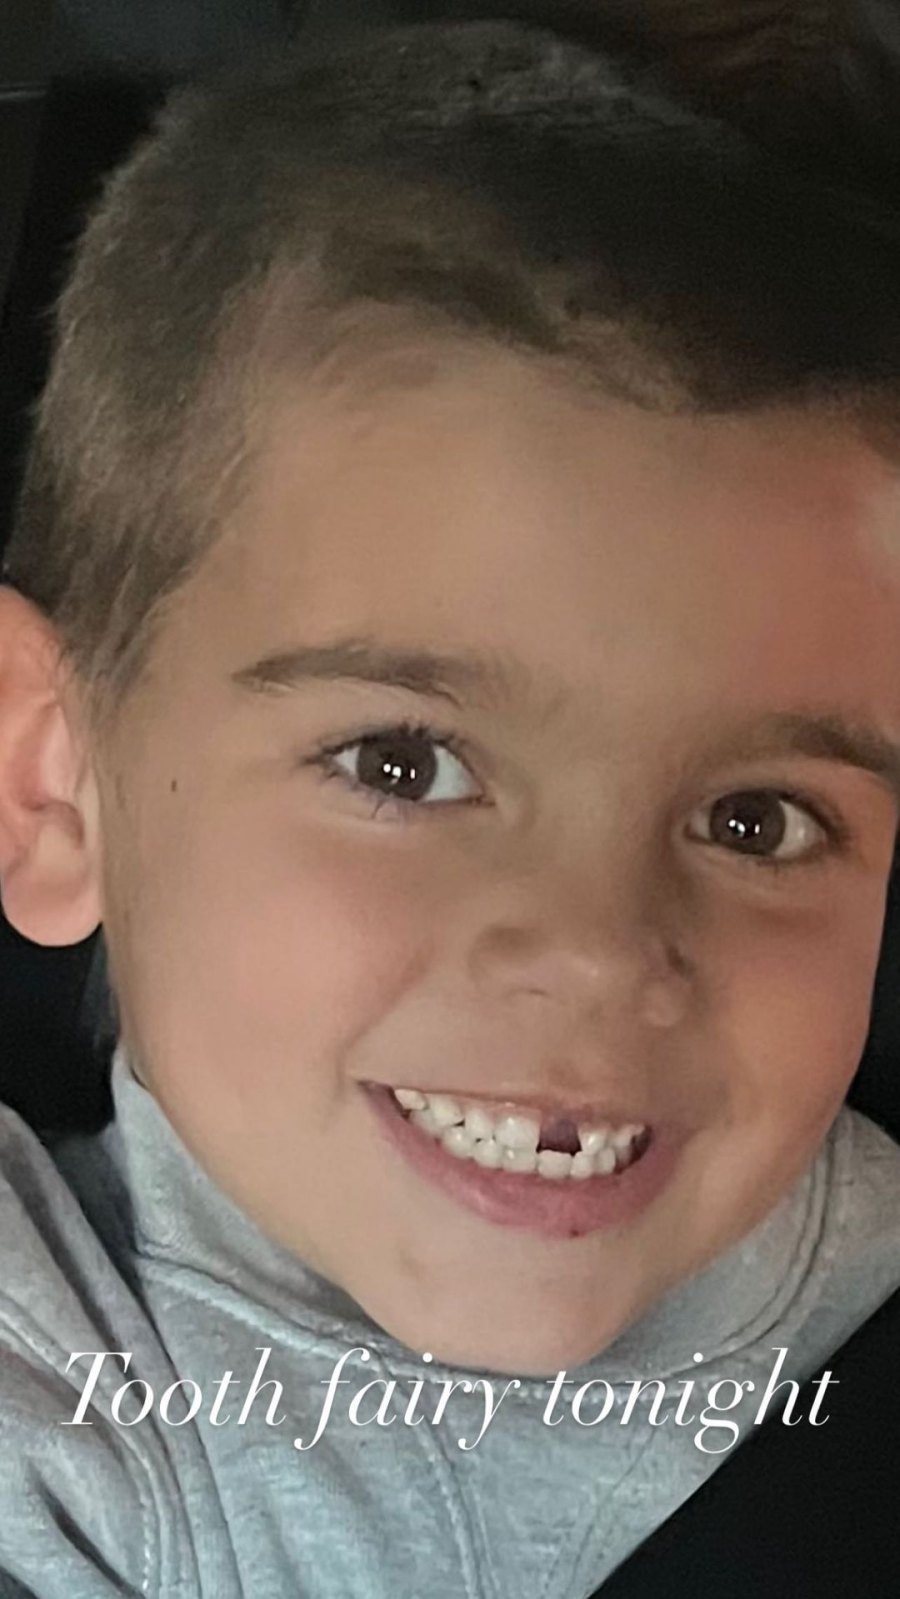 Scott Disick Shows 6-Year-Old Son Reign’s Missing Tooth